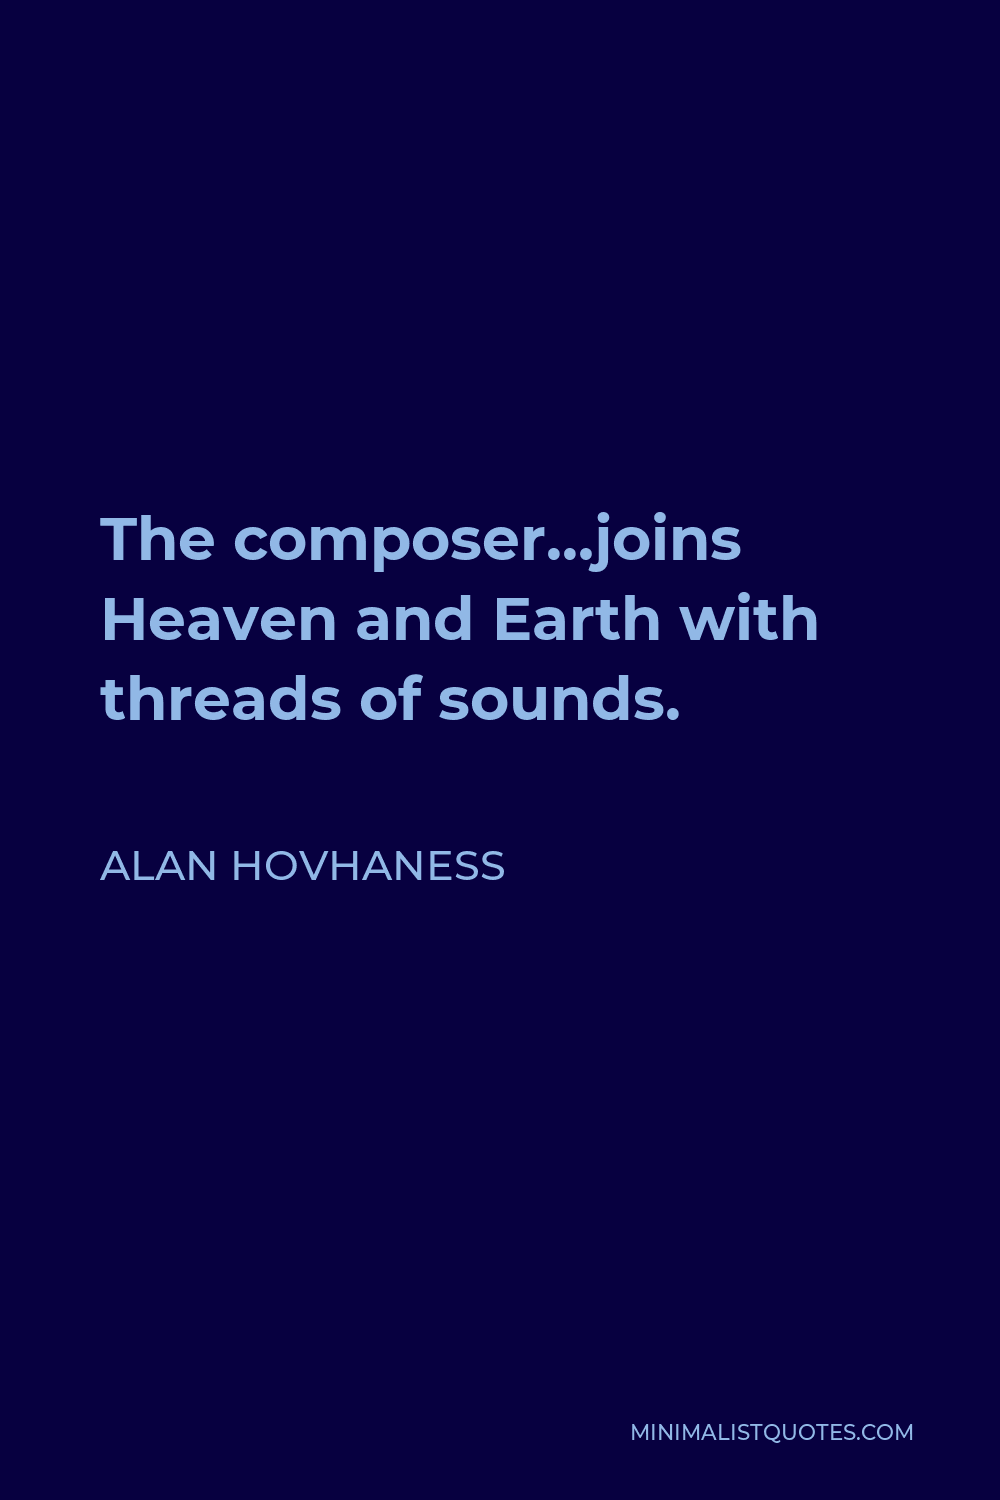 Alan Hovhaness Quote - The composer…joins Heaven and Earth with threads of sounds.